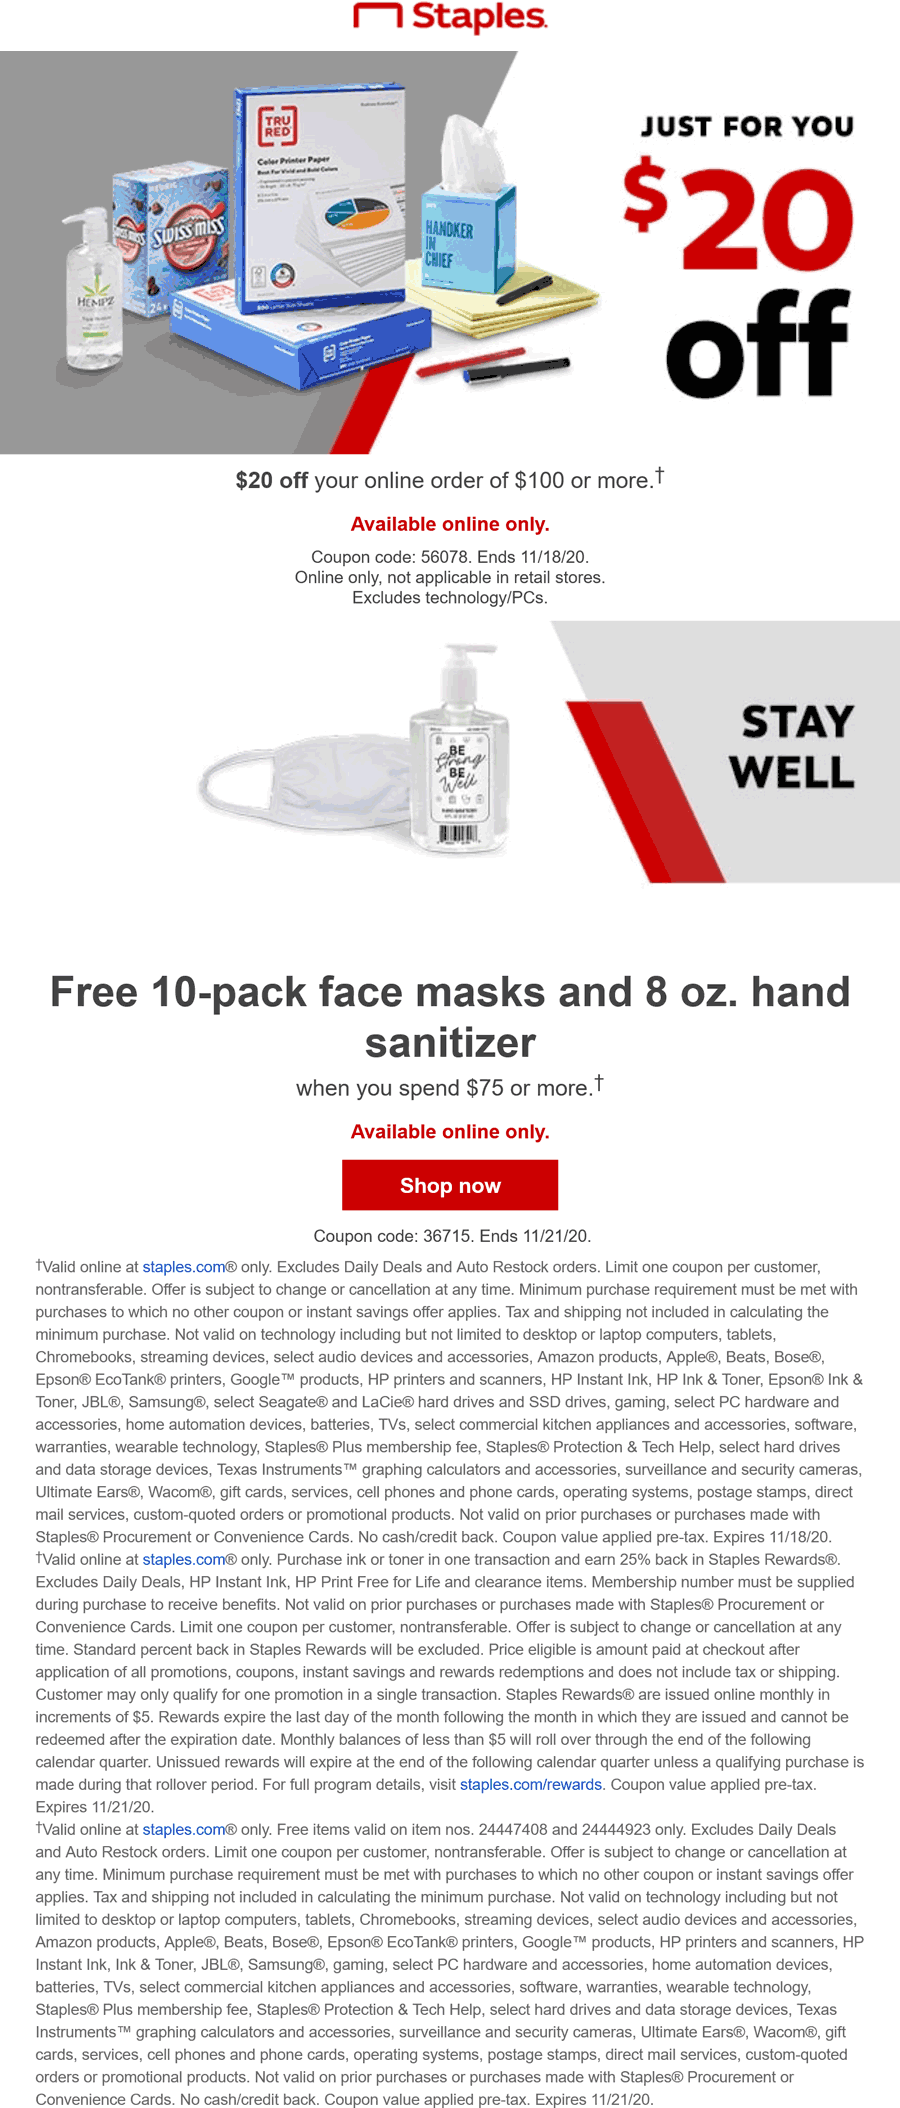 Staples stores Coupon  $20 off $100 + free masks & sanitizer today online at Staples office supplies via promo code 56078 #staples 